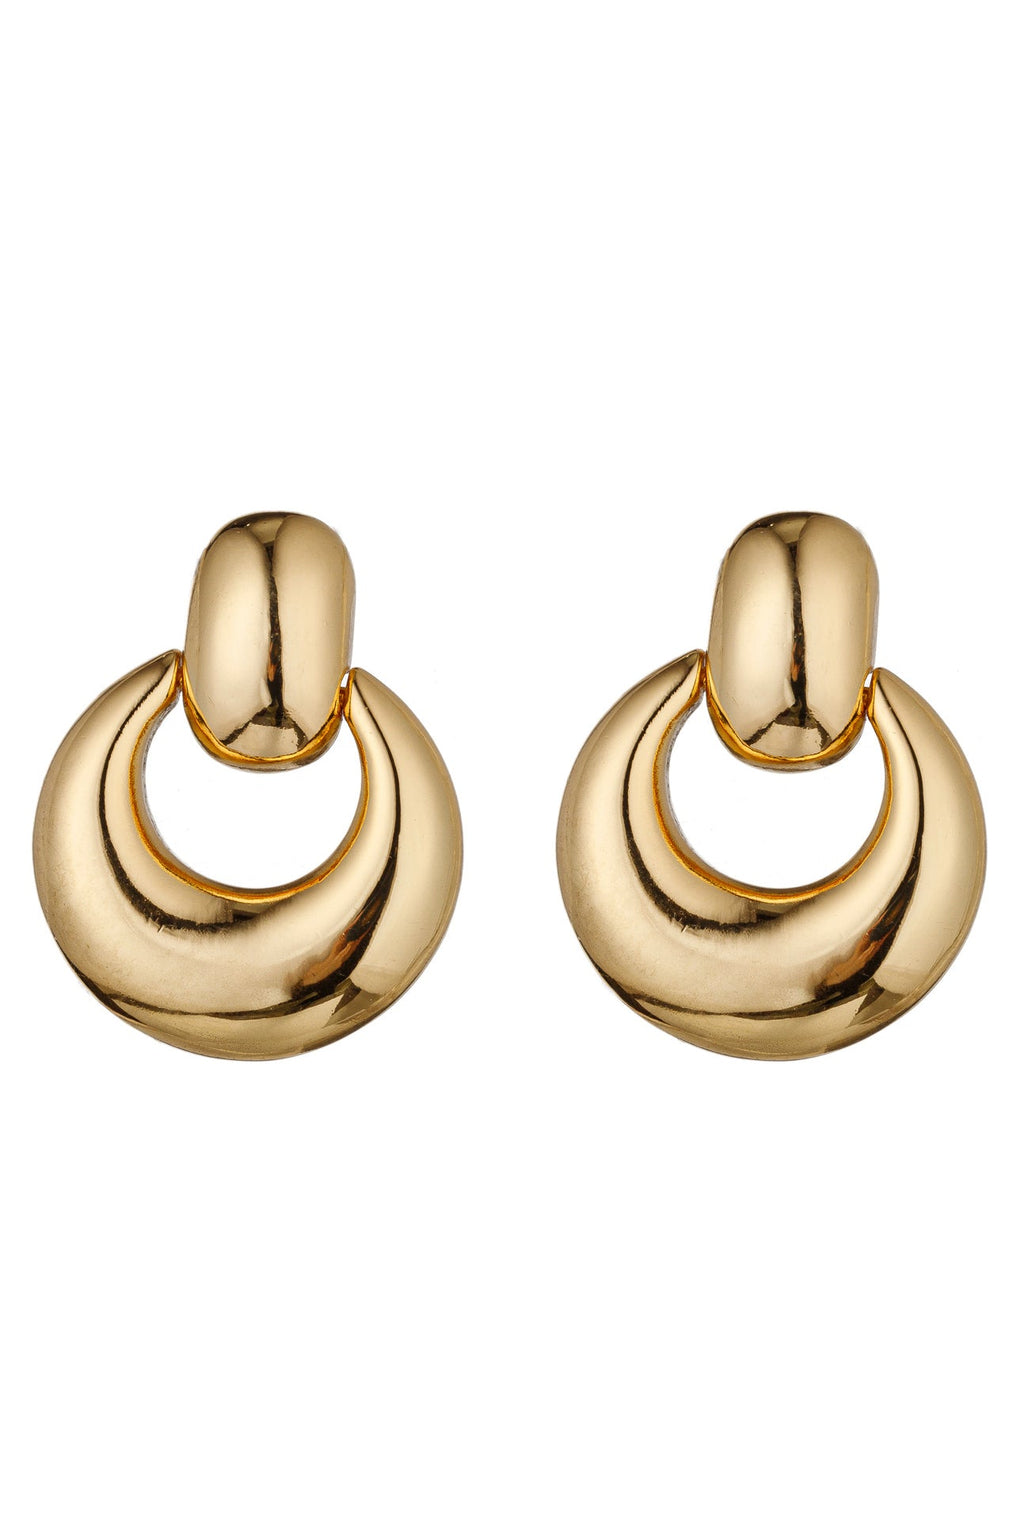 Neda Gold Drop Earrings: Glistening Elegance with a Touch of Luxury.